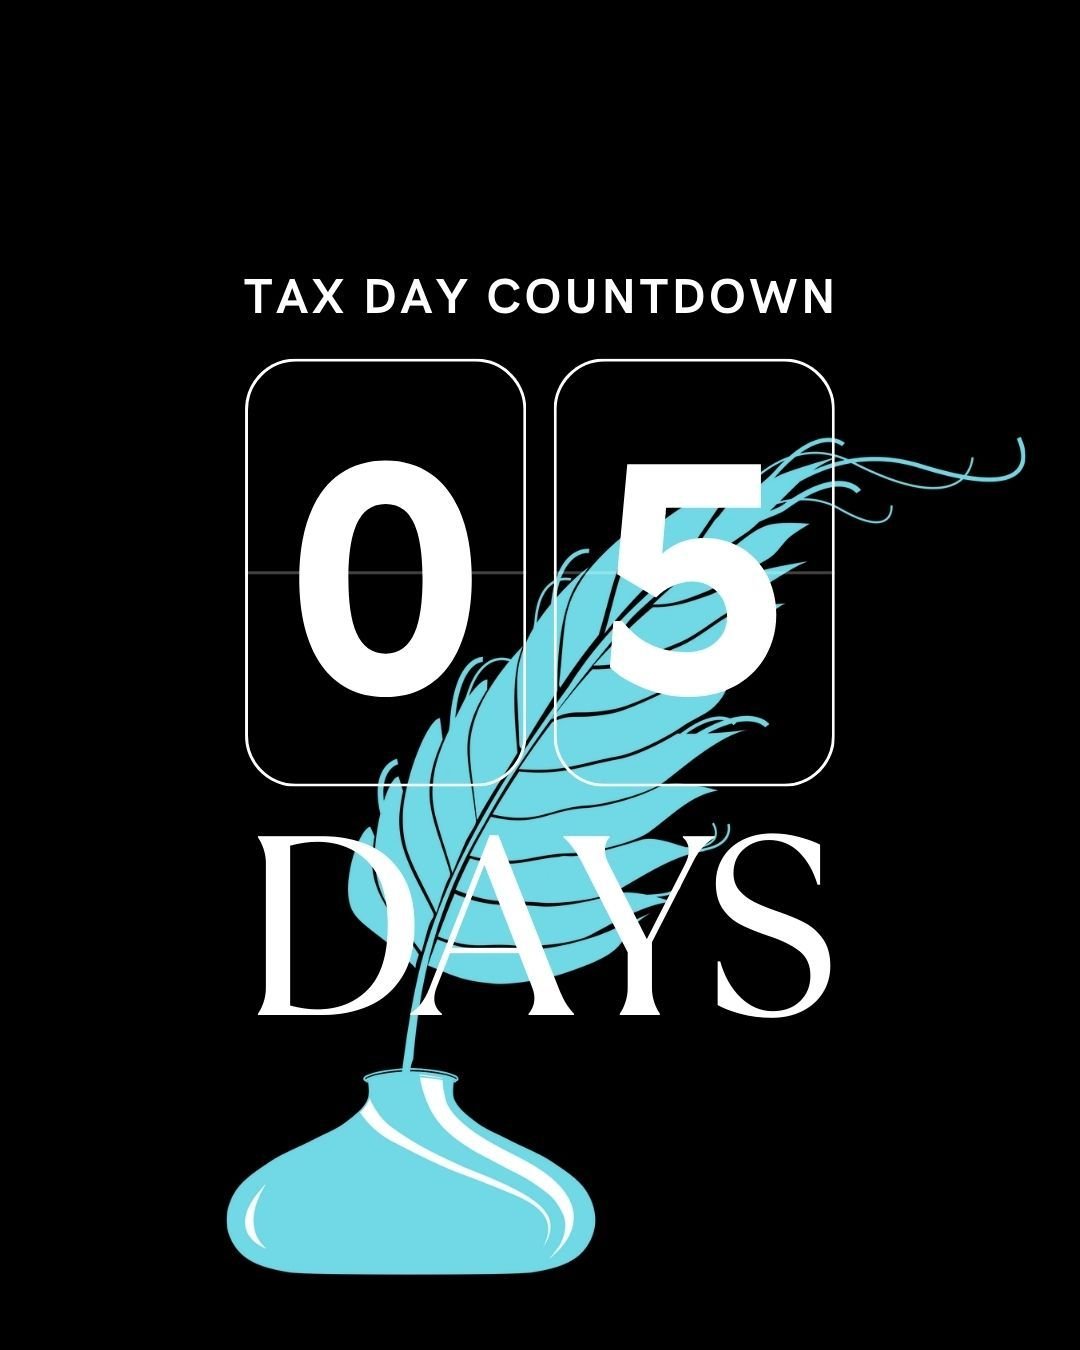 📆 Time is ticking towards Tax Day!

You've got just FIVE days left to file your return or extend... 

What happens if you miss the deadline? 👇

You may be subject to penalties AND interest - all because you didn't file your return by April 15th!

S